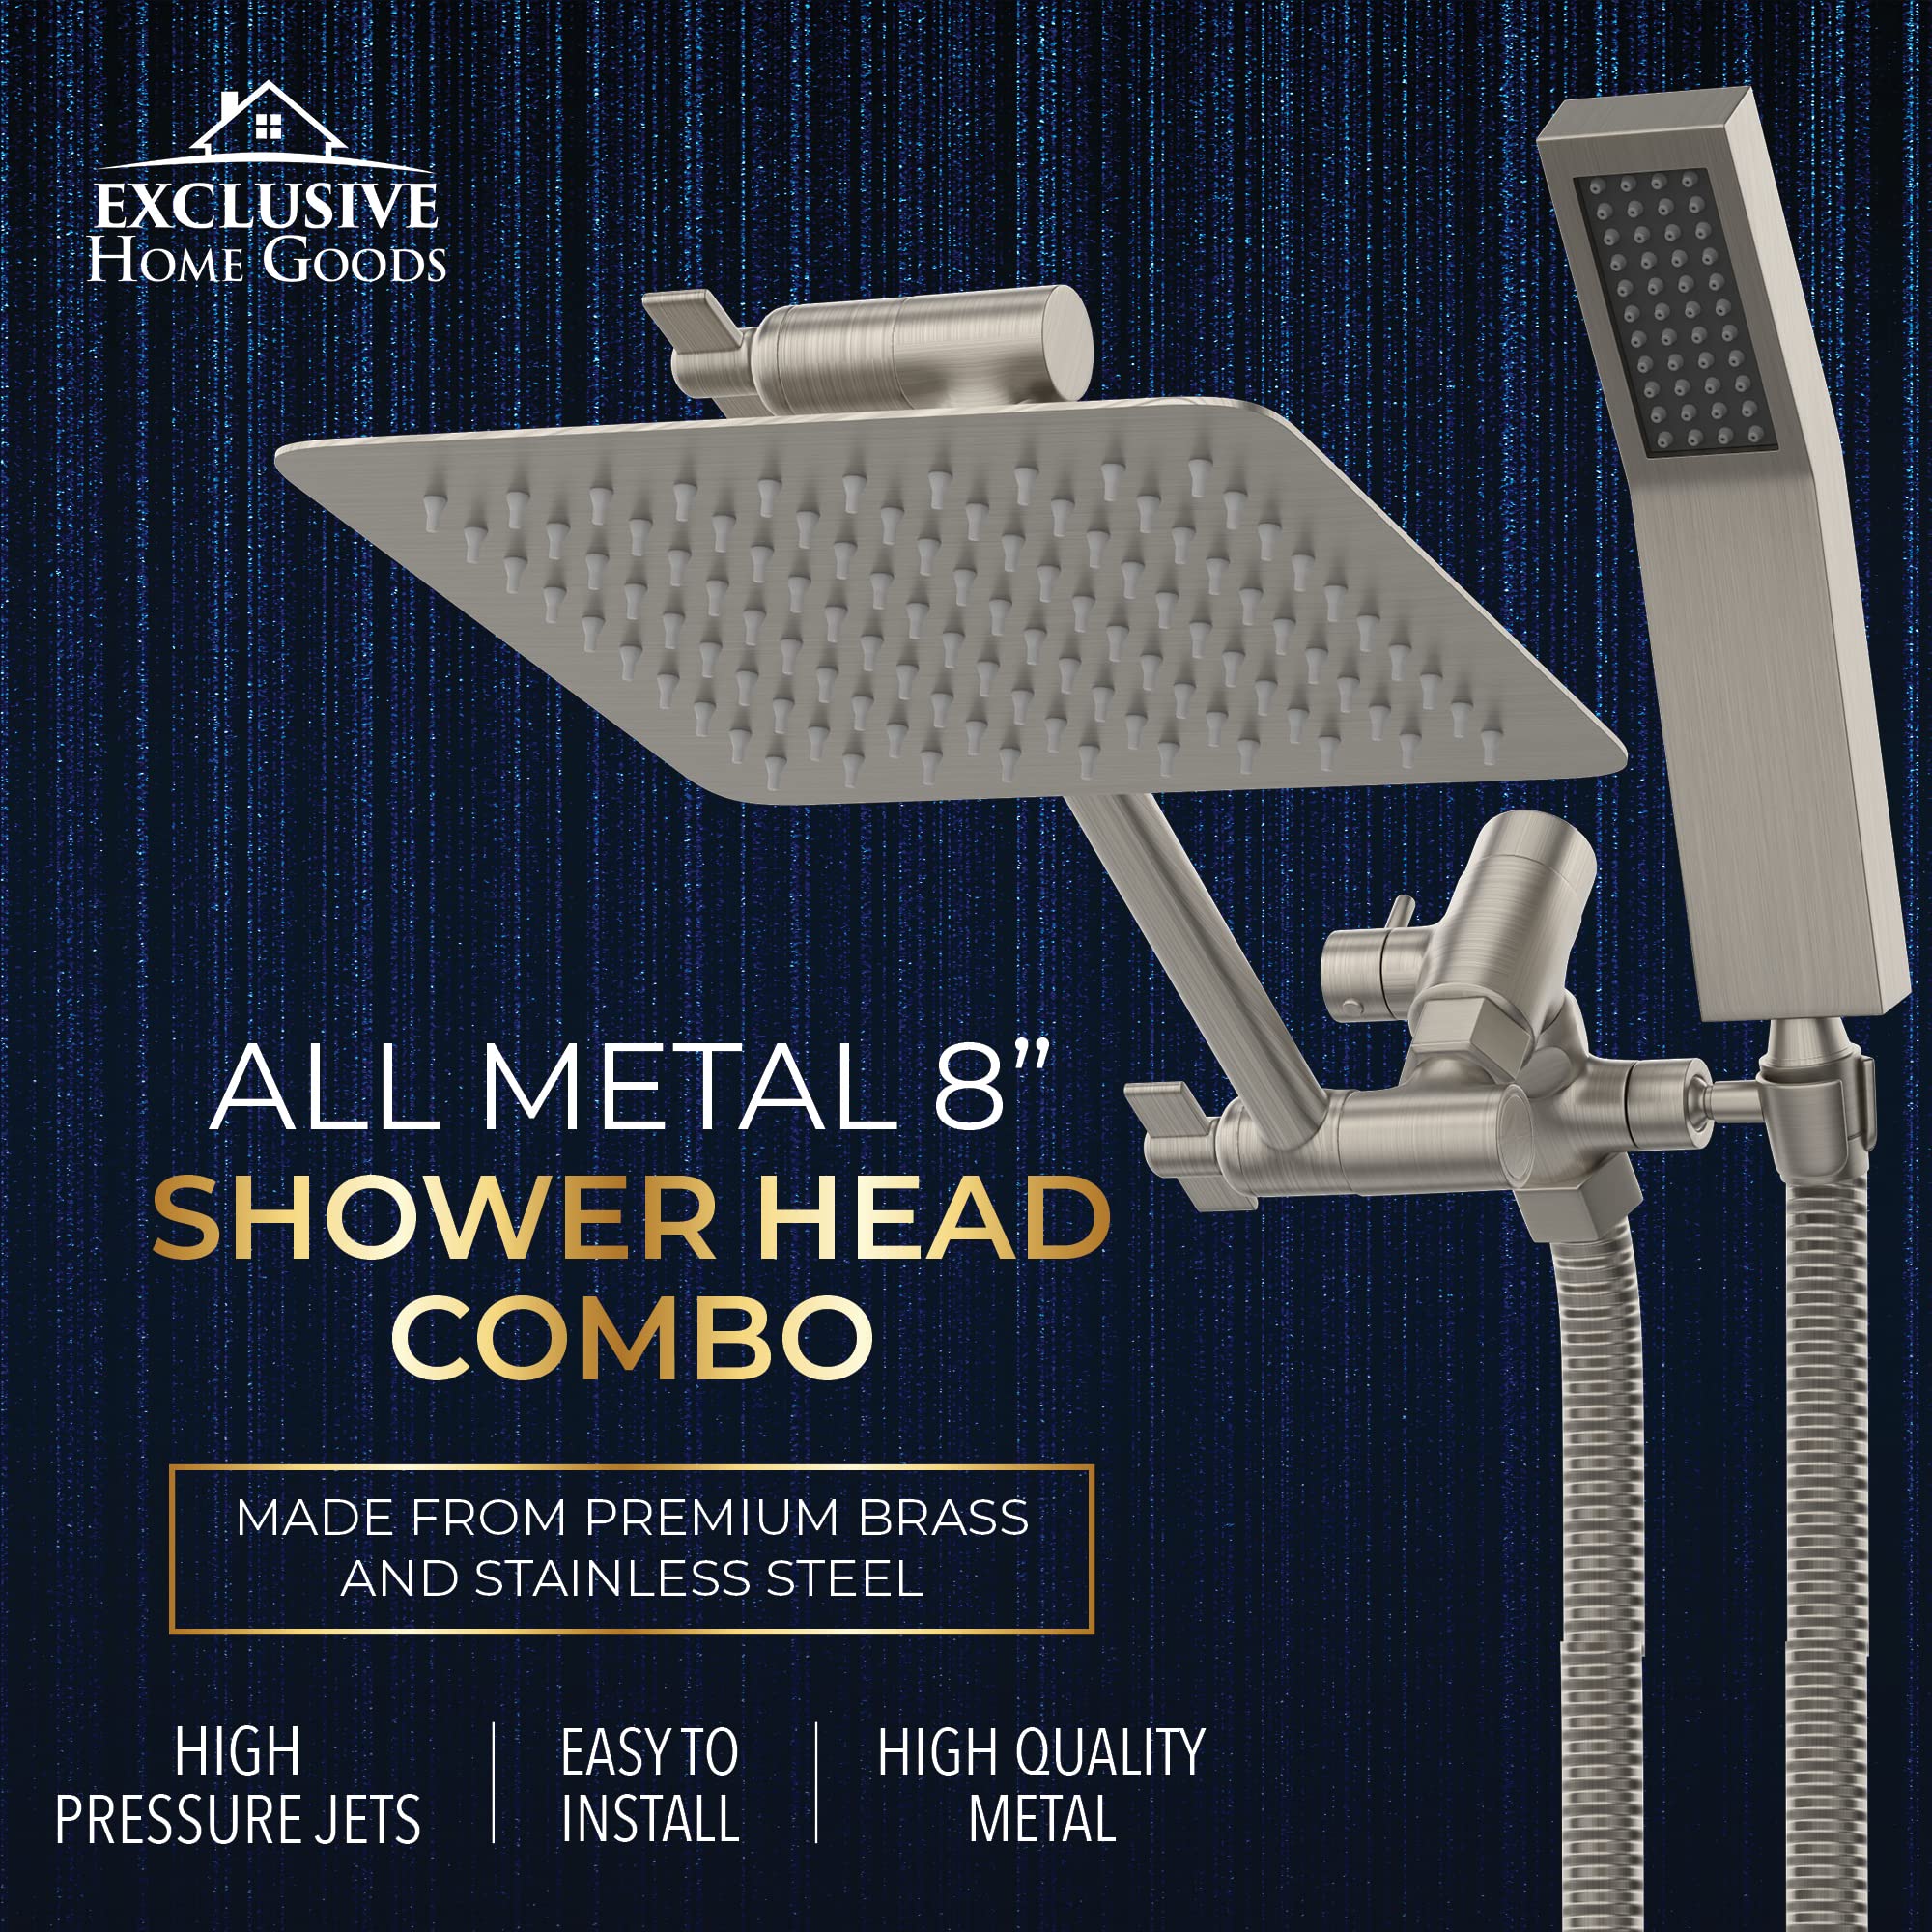 All Metal Shower Head Dual Square Shower Head With Handheld Wand 71in Hose Set, High Pressure Rain Shower Heads Combo, 3-Way Diverter Rainfall Showerhead with Adjustable Extension Arm  - Very Good